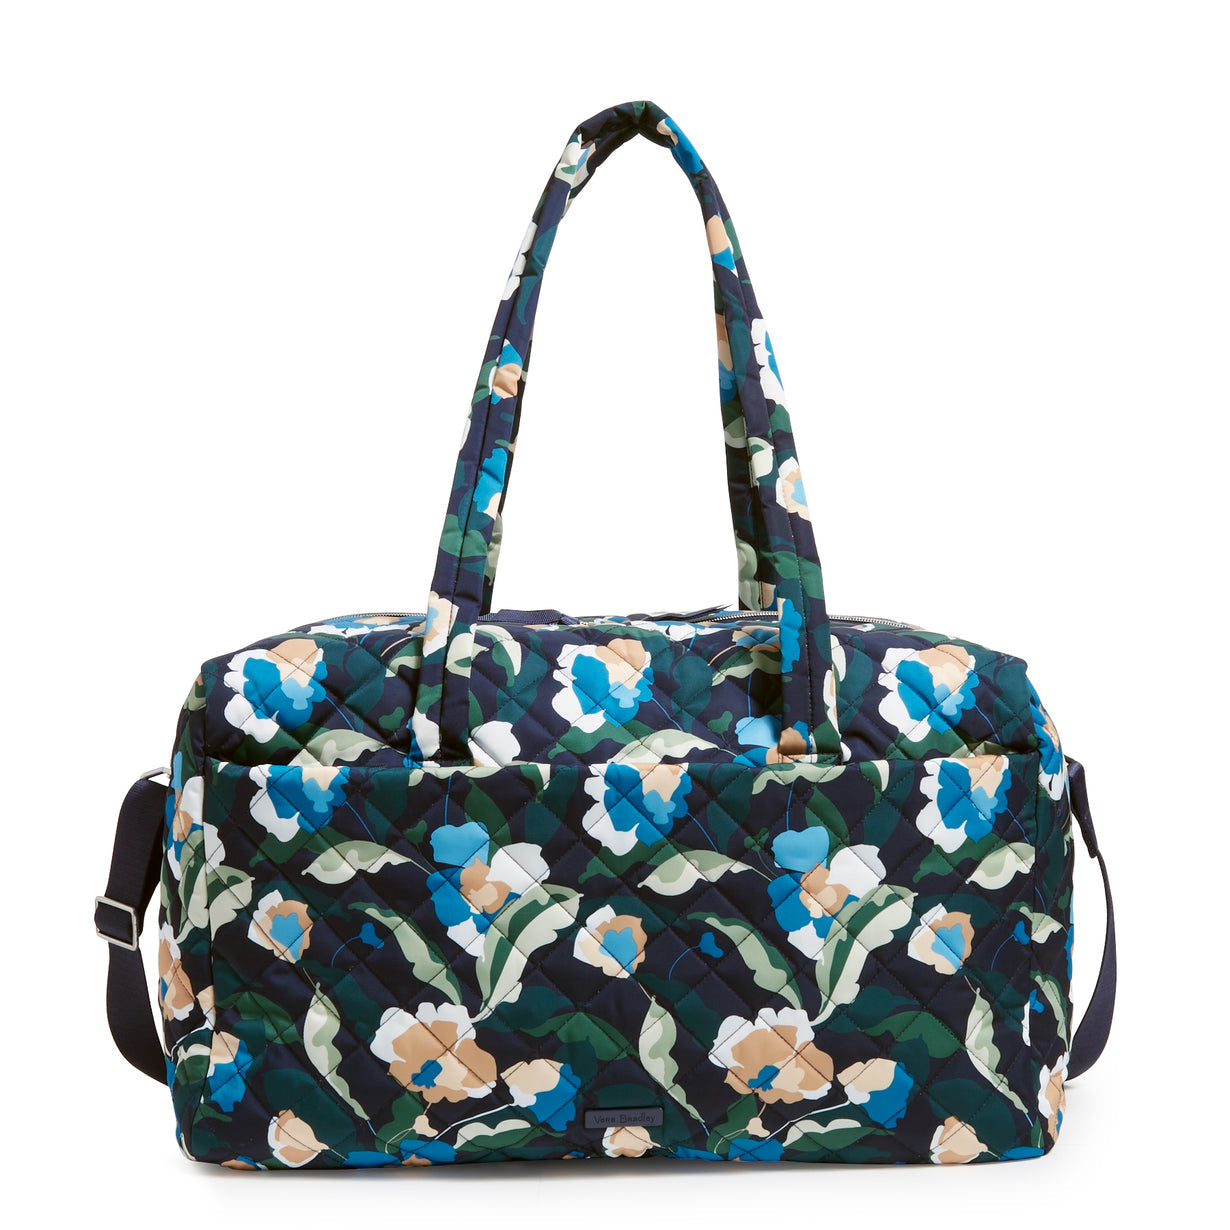 A Large Travel Duffel Bag in Immersed Blooms pattern from Vera Bradley.